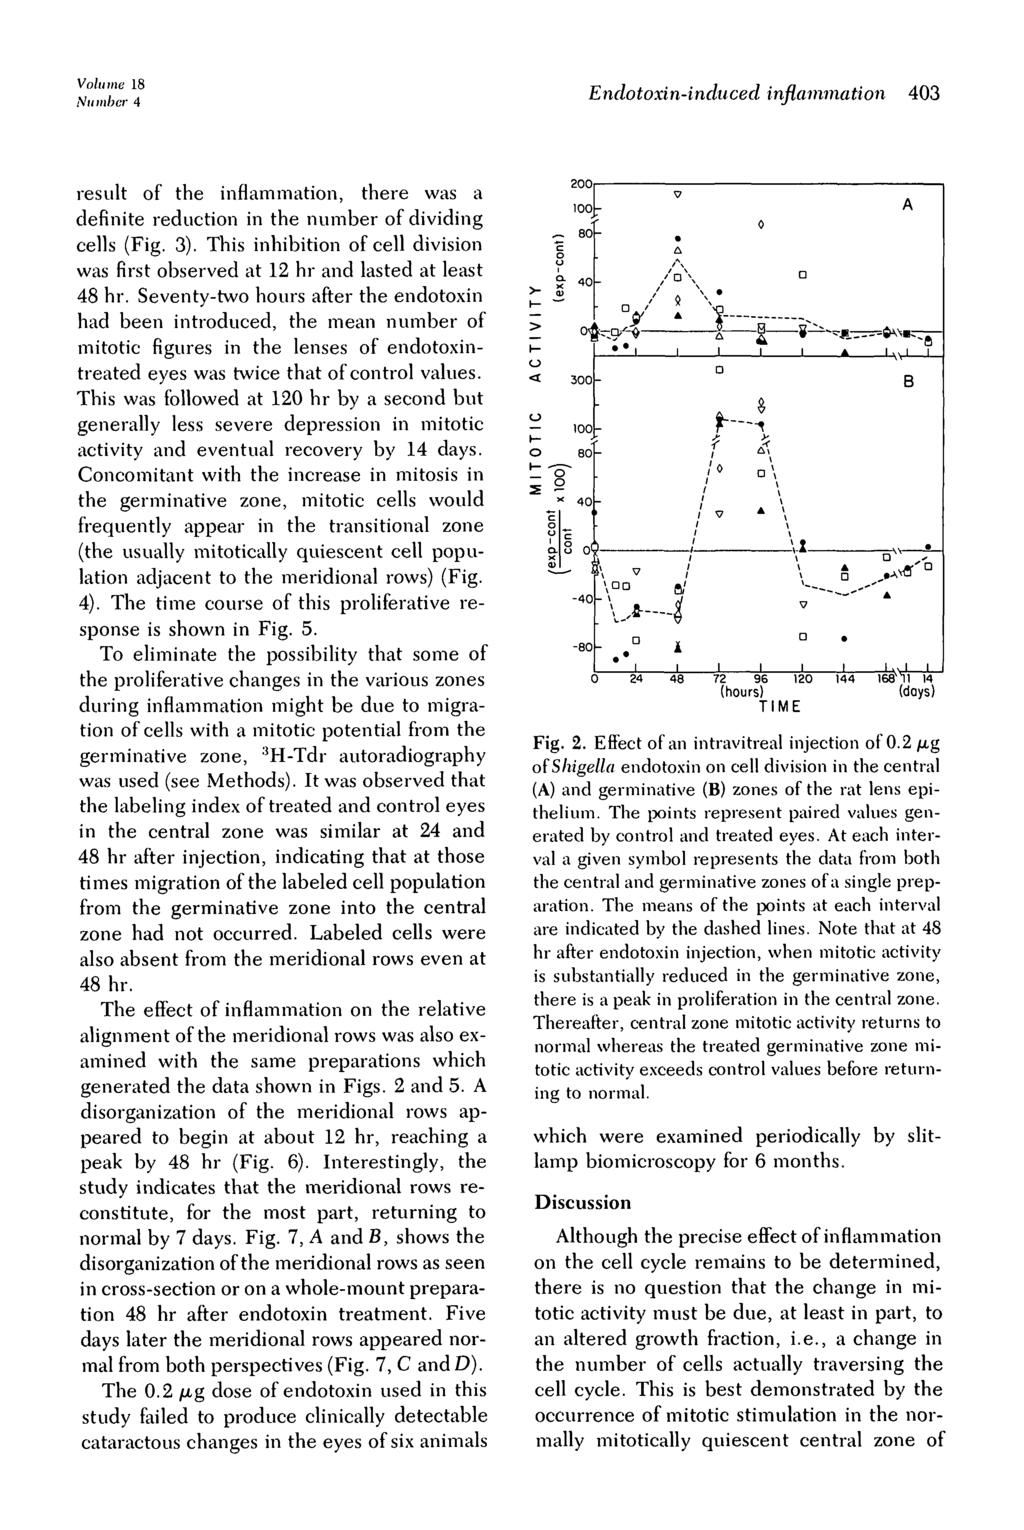 Volume 18 Number 4 Endotoxin-induced inflammation 403 result of the inflammation, there was a definite reduction in the number of dividing cells (Fig. 3).